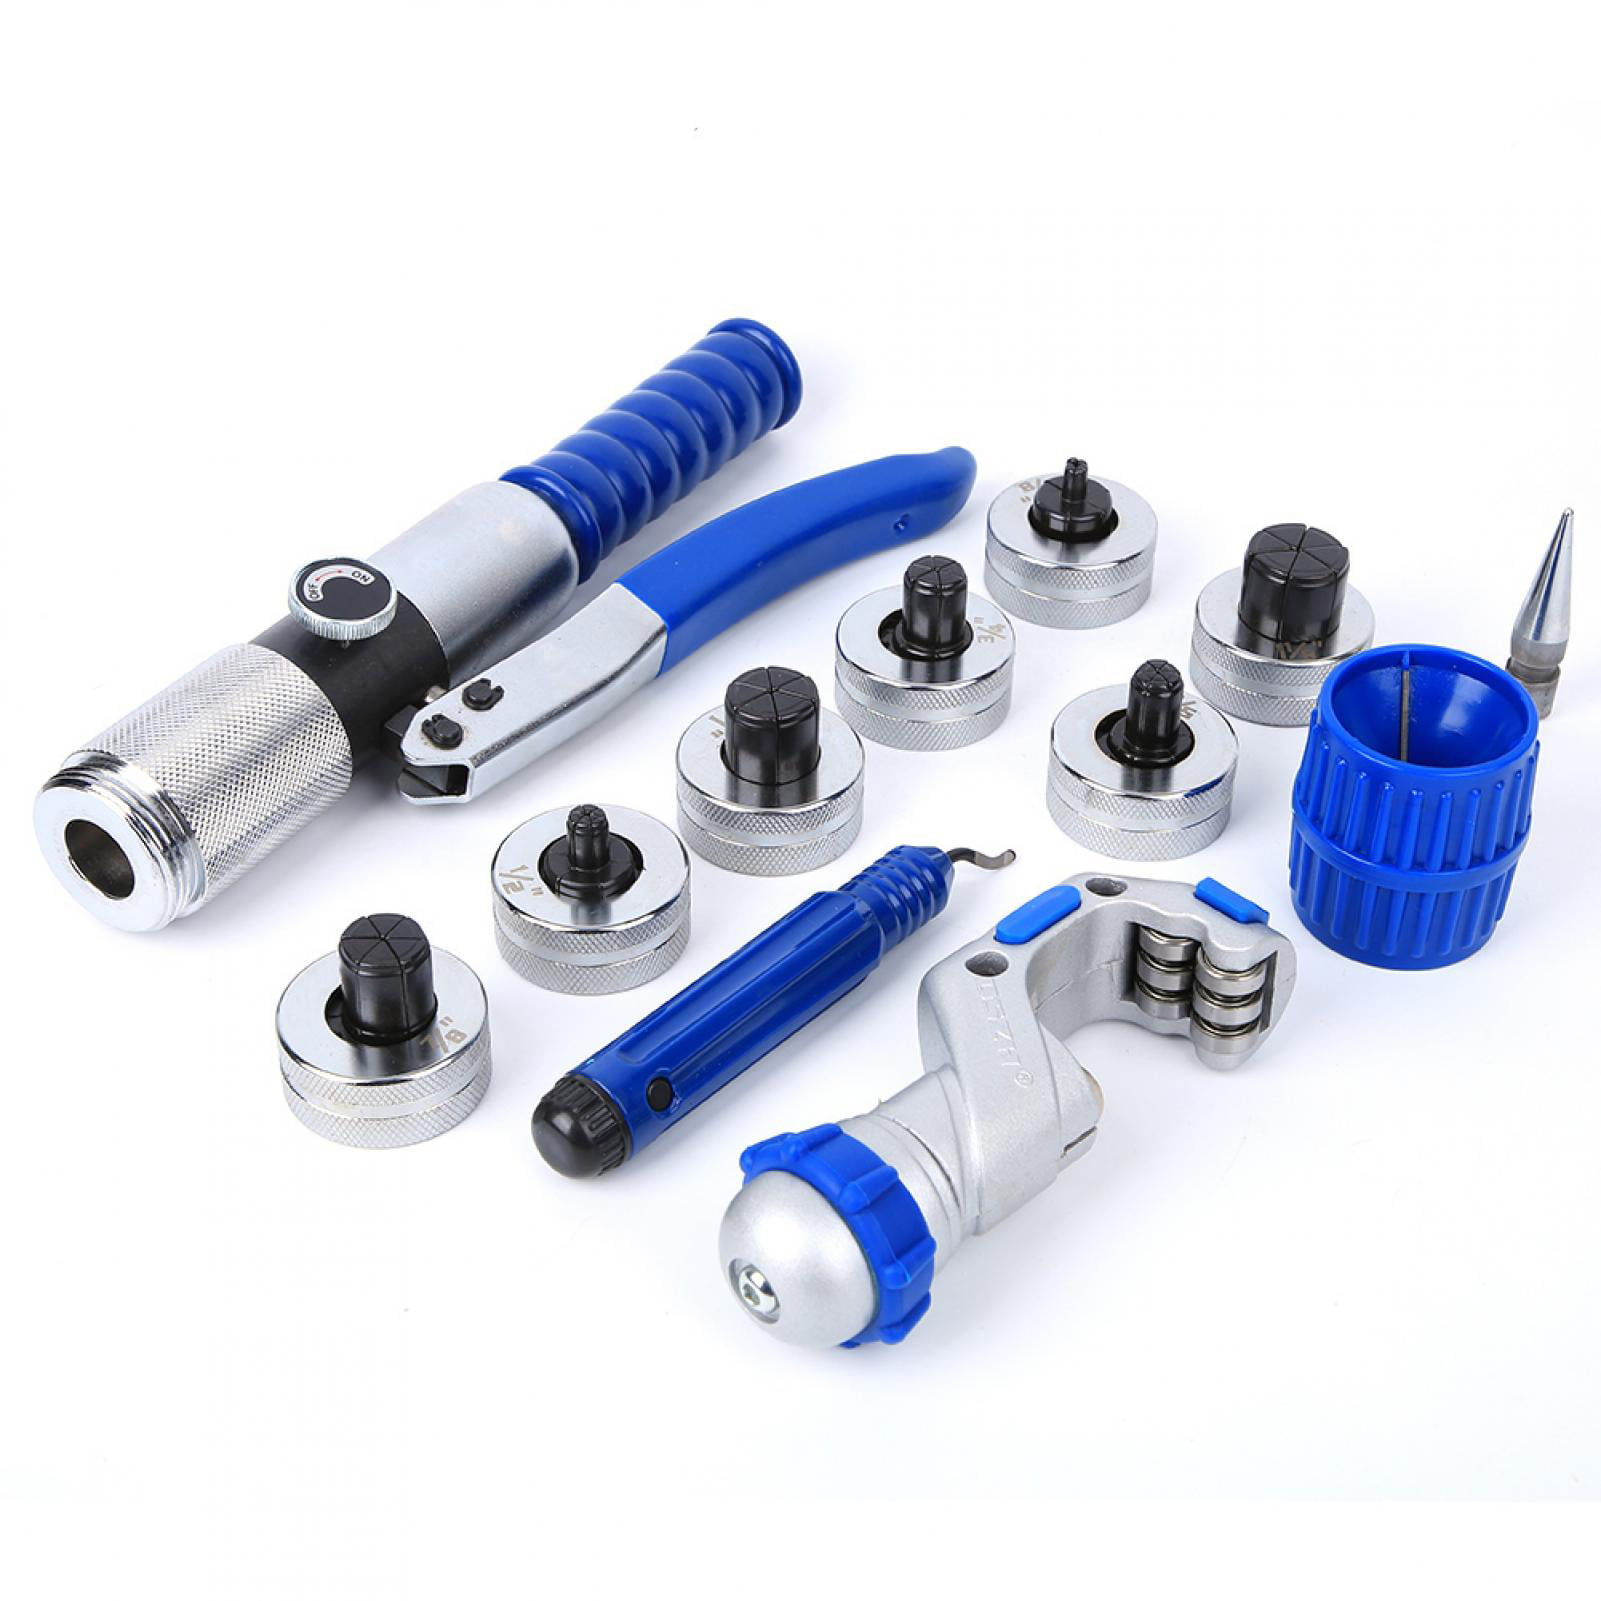 HVAC Tools Flaring Tool for Aluminum Pipes Copper Pipes Hydraulic Tube Expander 10-28mm CT-300A Hydraulic Pipe Expander 